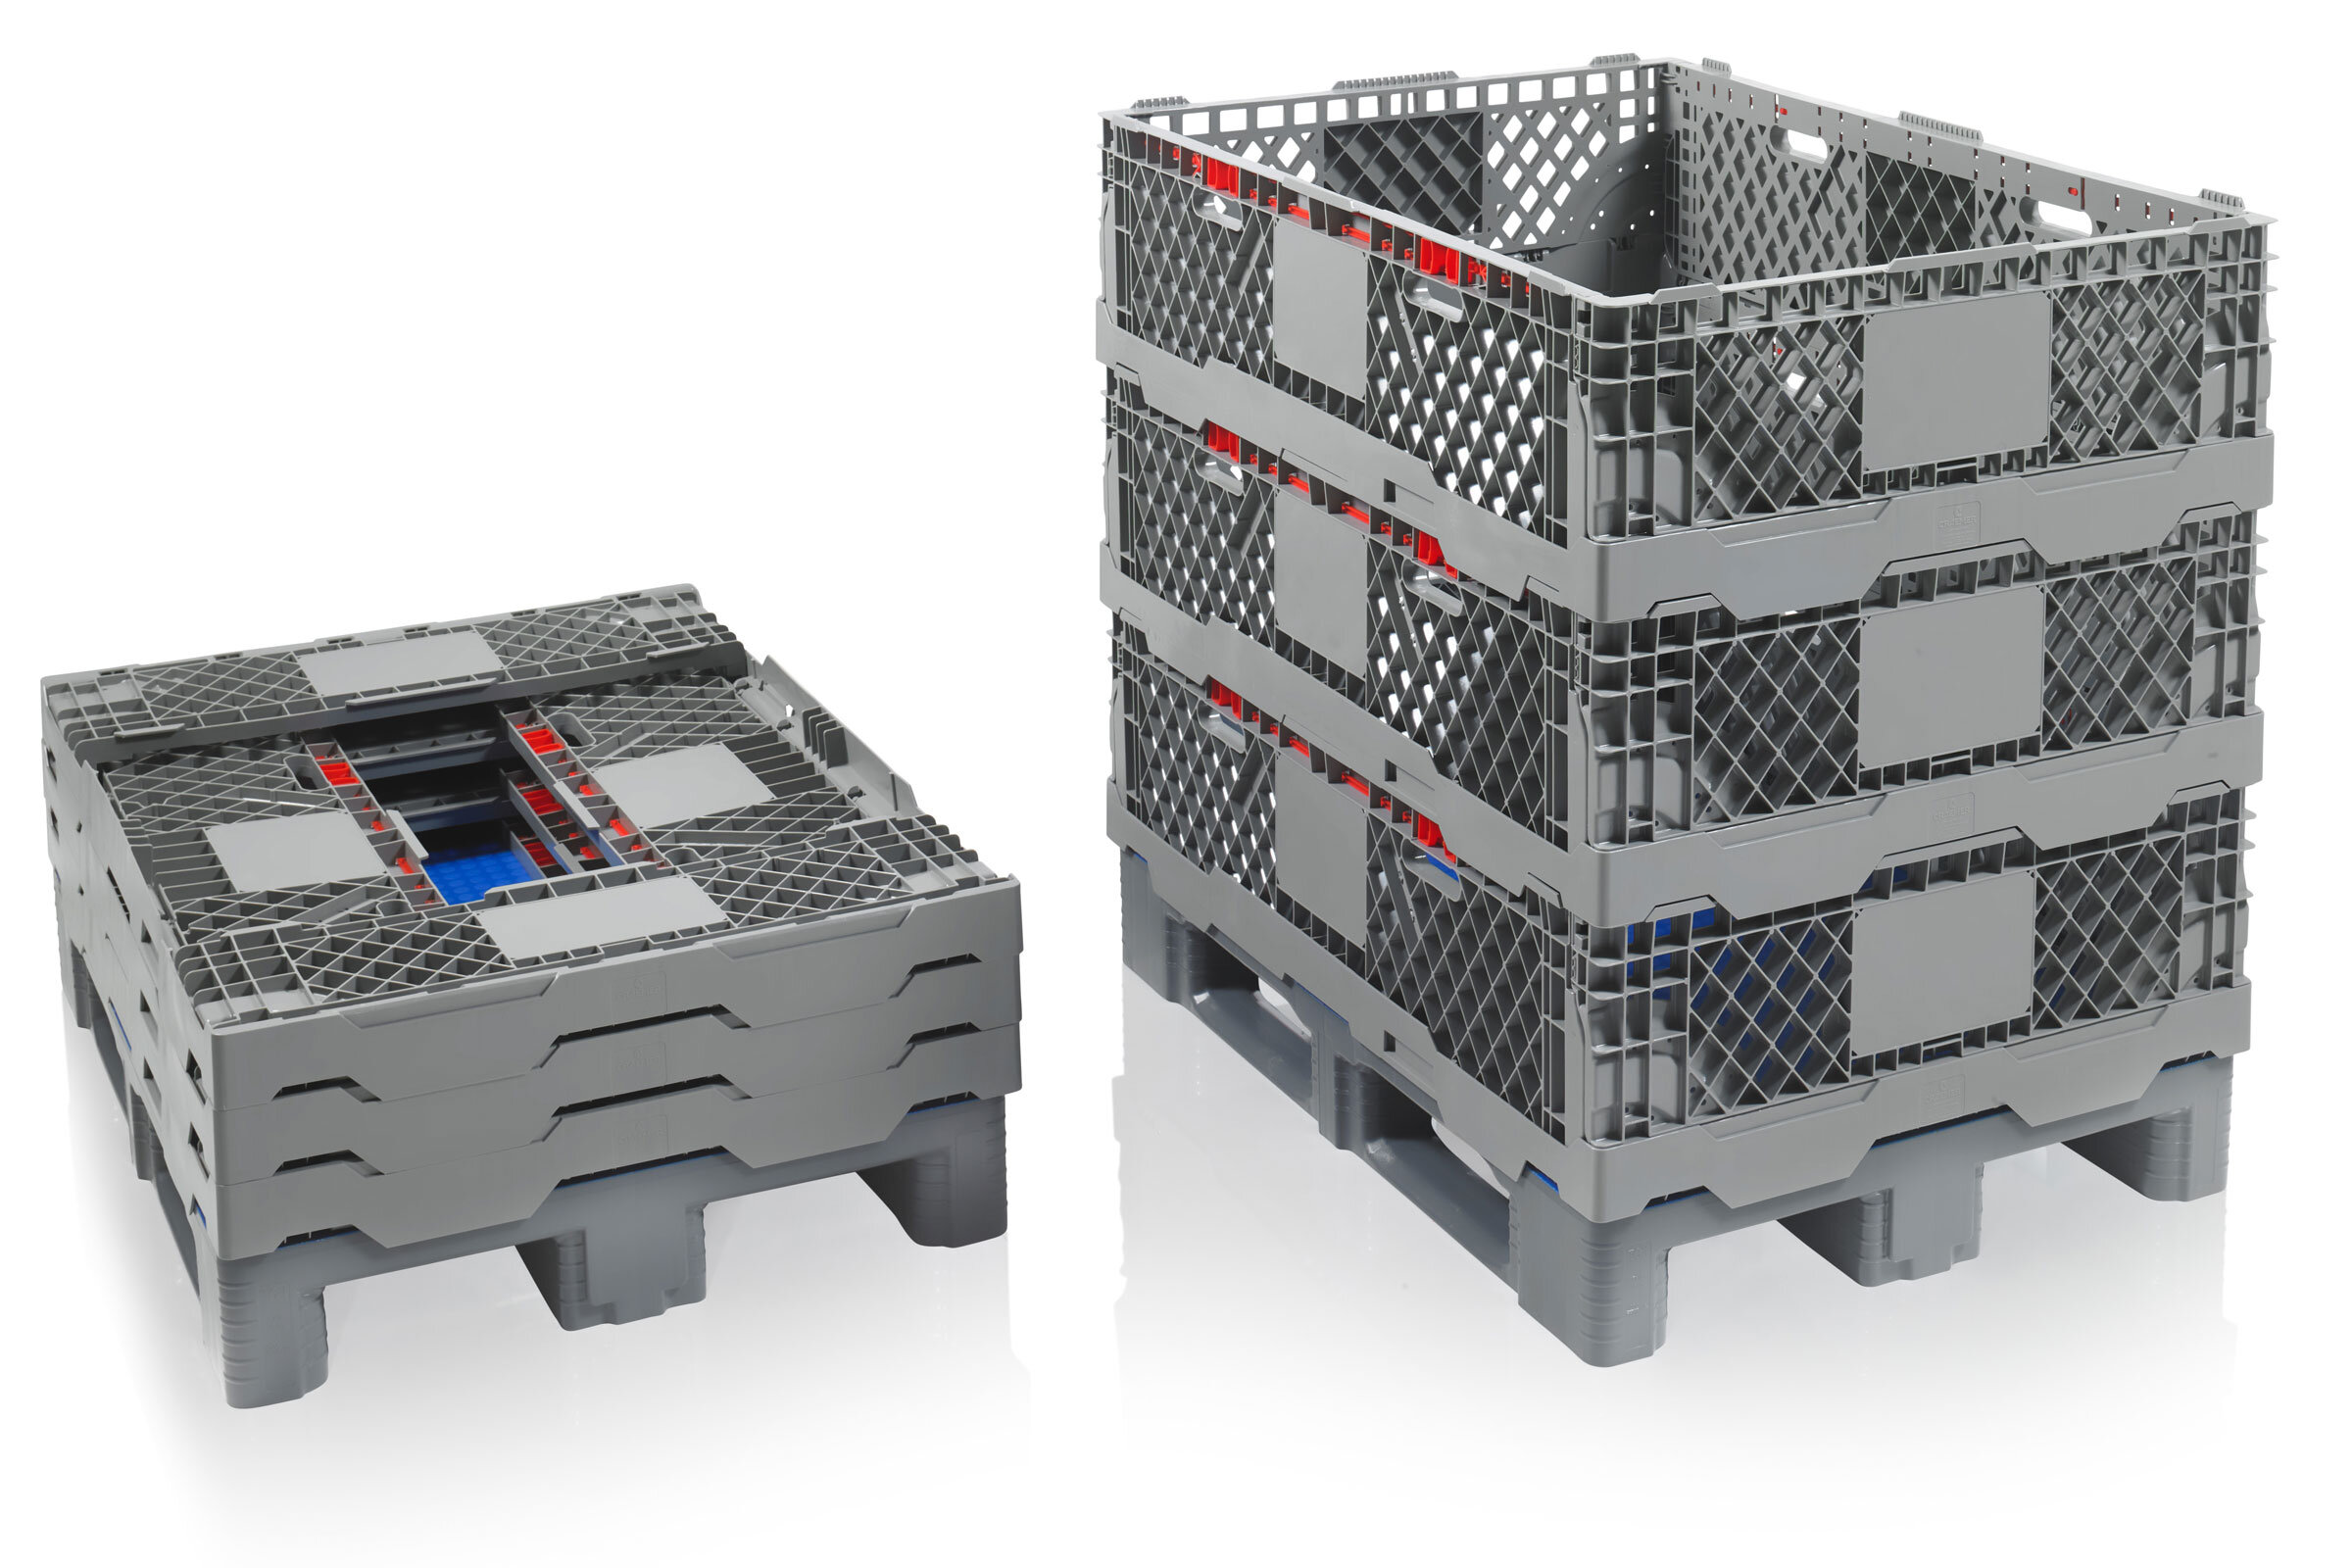 Added Value For Logistics: The Euro Pallet Frame CC1 From Craemer